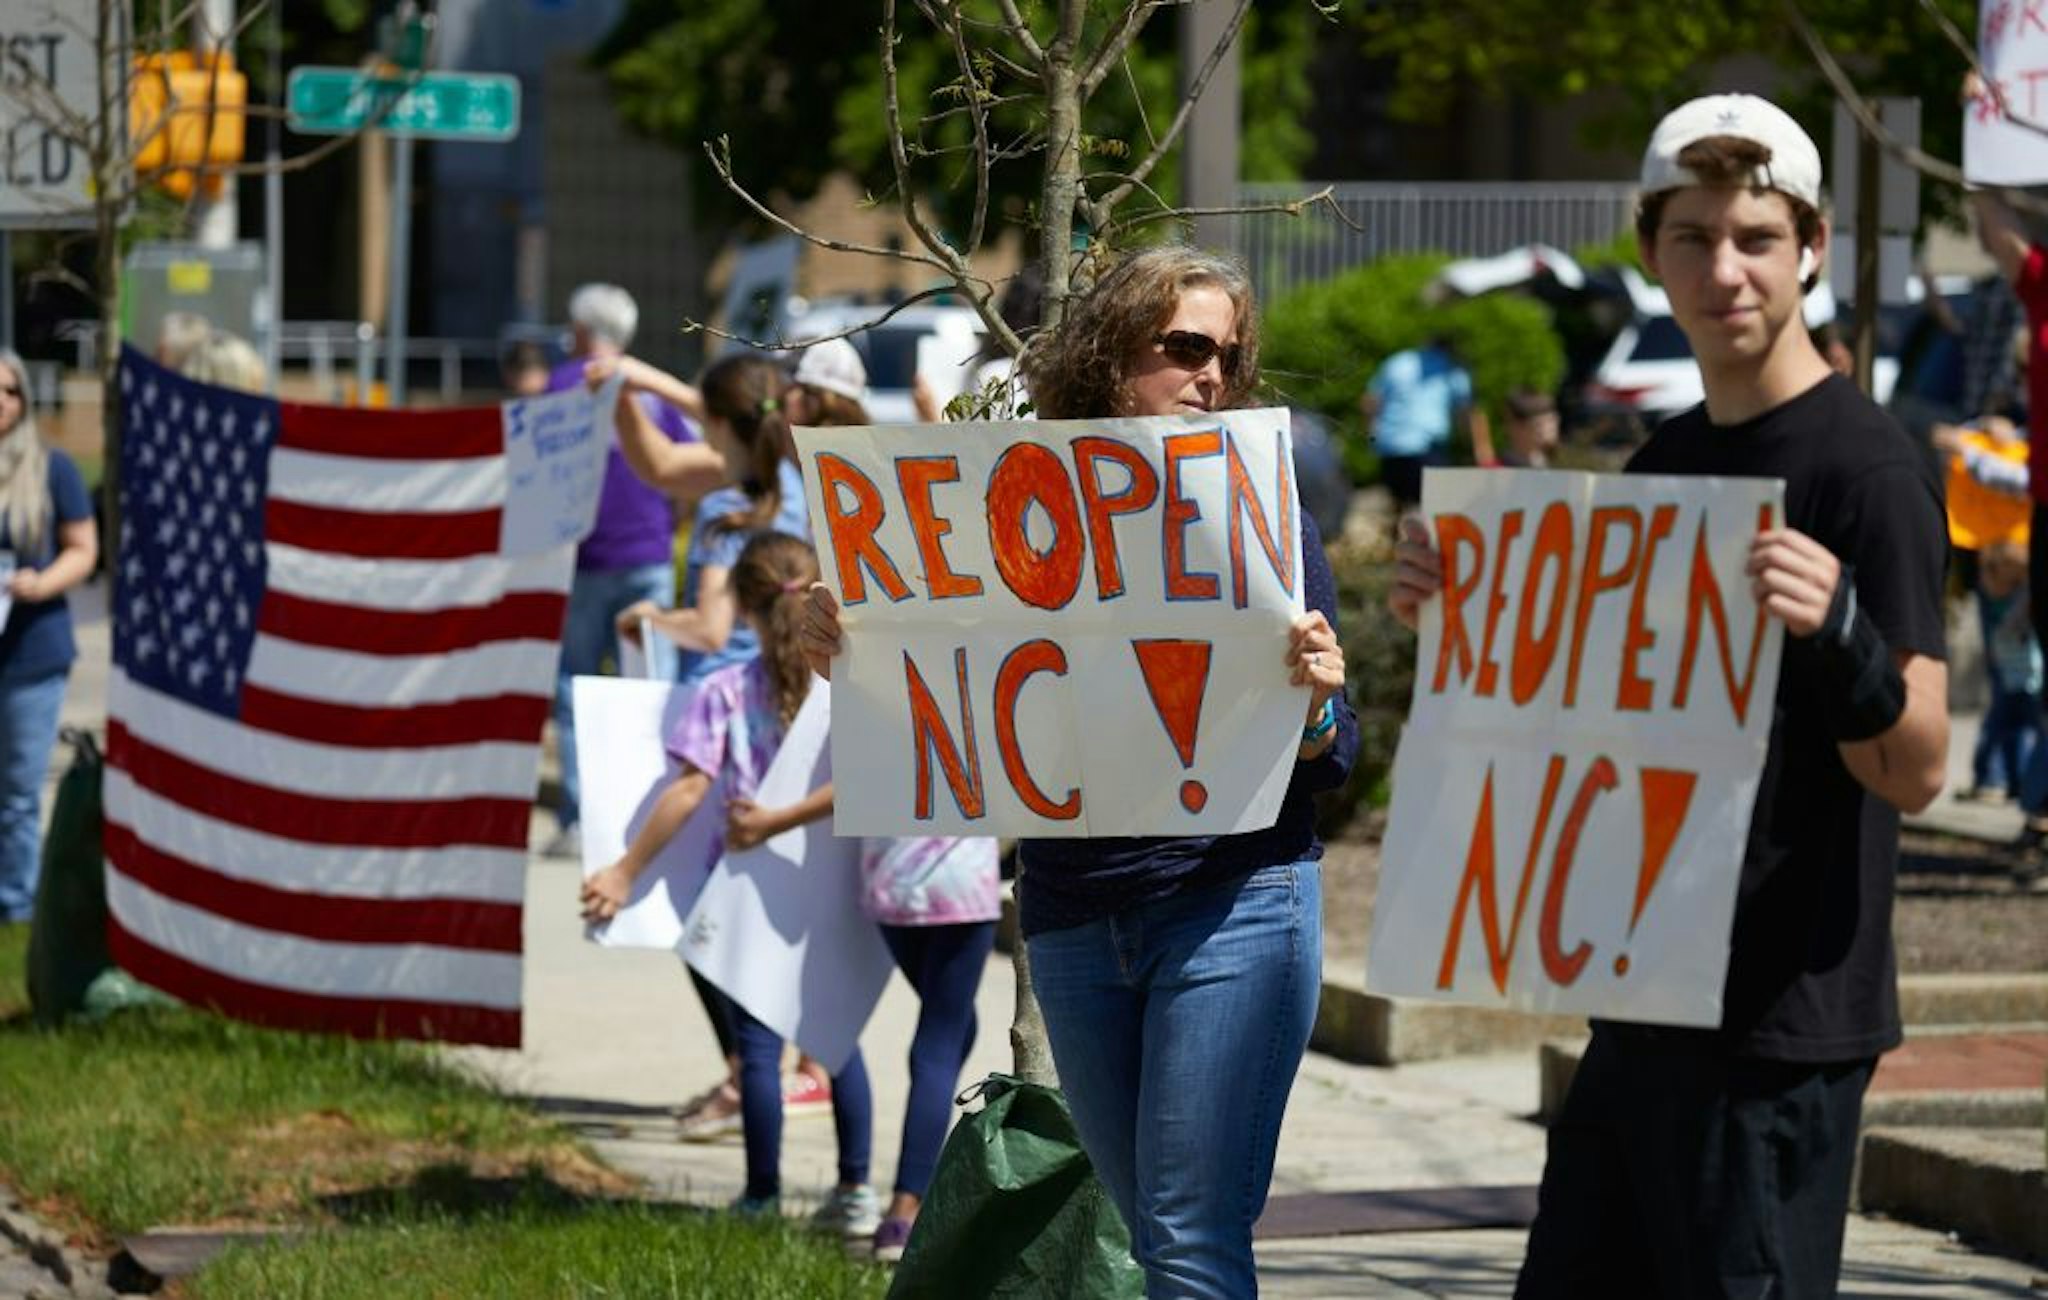 Protesters from a grassroots organization called REOPEN NC demonstrate against the North Carolina coronavirus lockdown at a parking lot adjacent to the North Carolina State Legislature in Raleigh, North Carolina, on April 14, 2020. - The group was demanding the state economy be opened up no later than April 29. (Photo by Logan Cyrus / AFP)